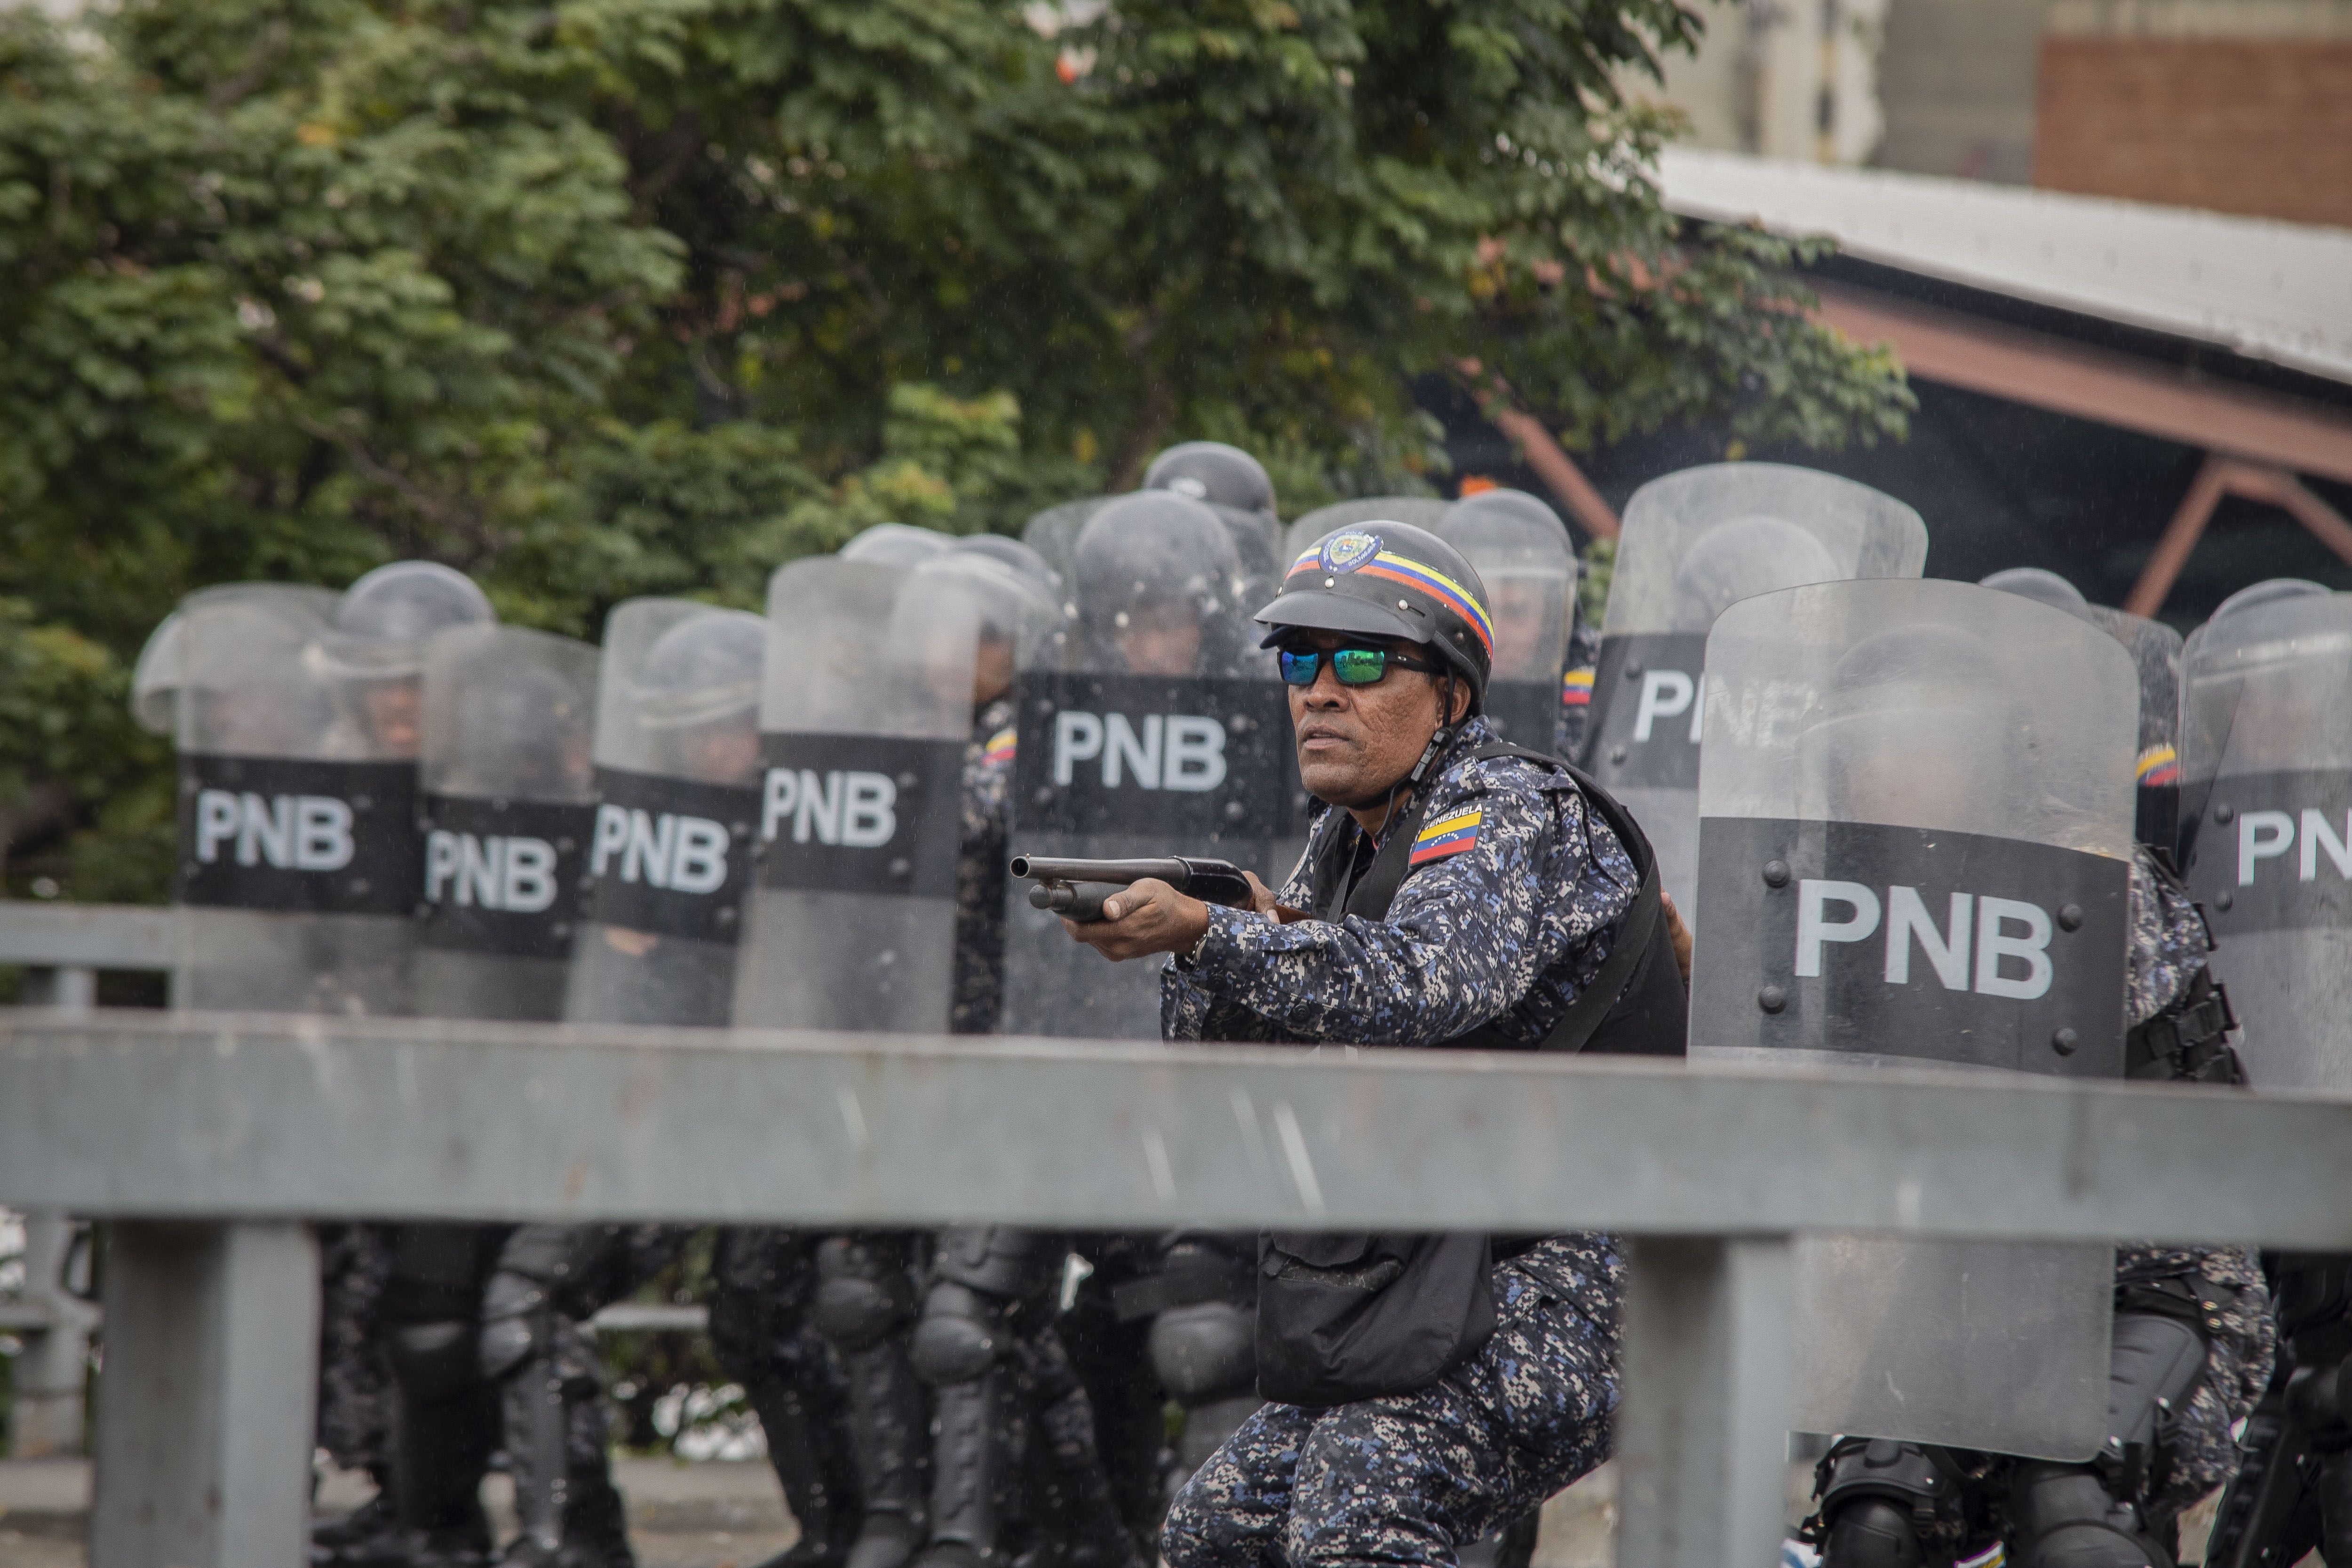 Soldiers with riot gear.